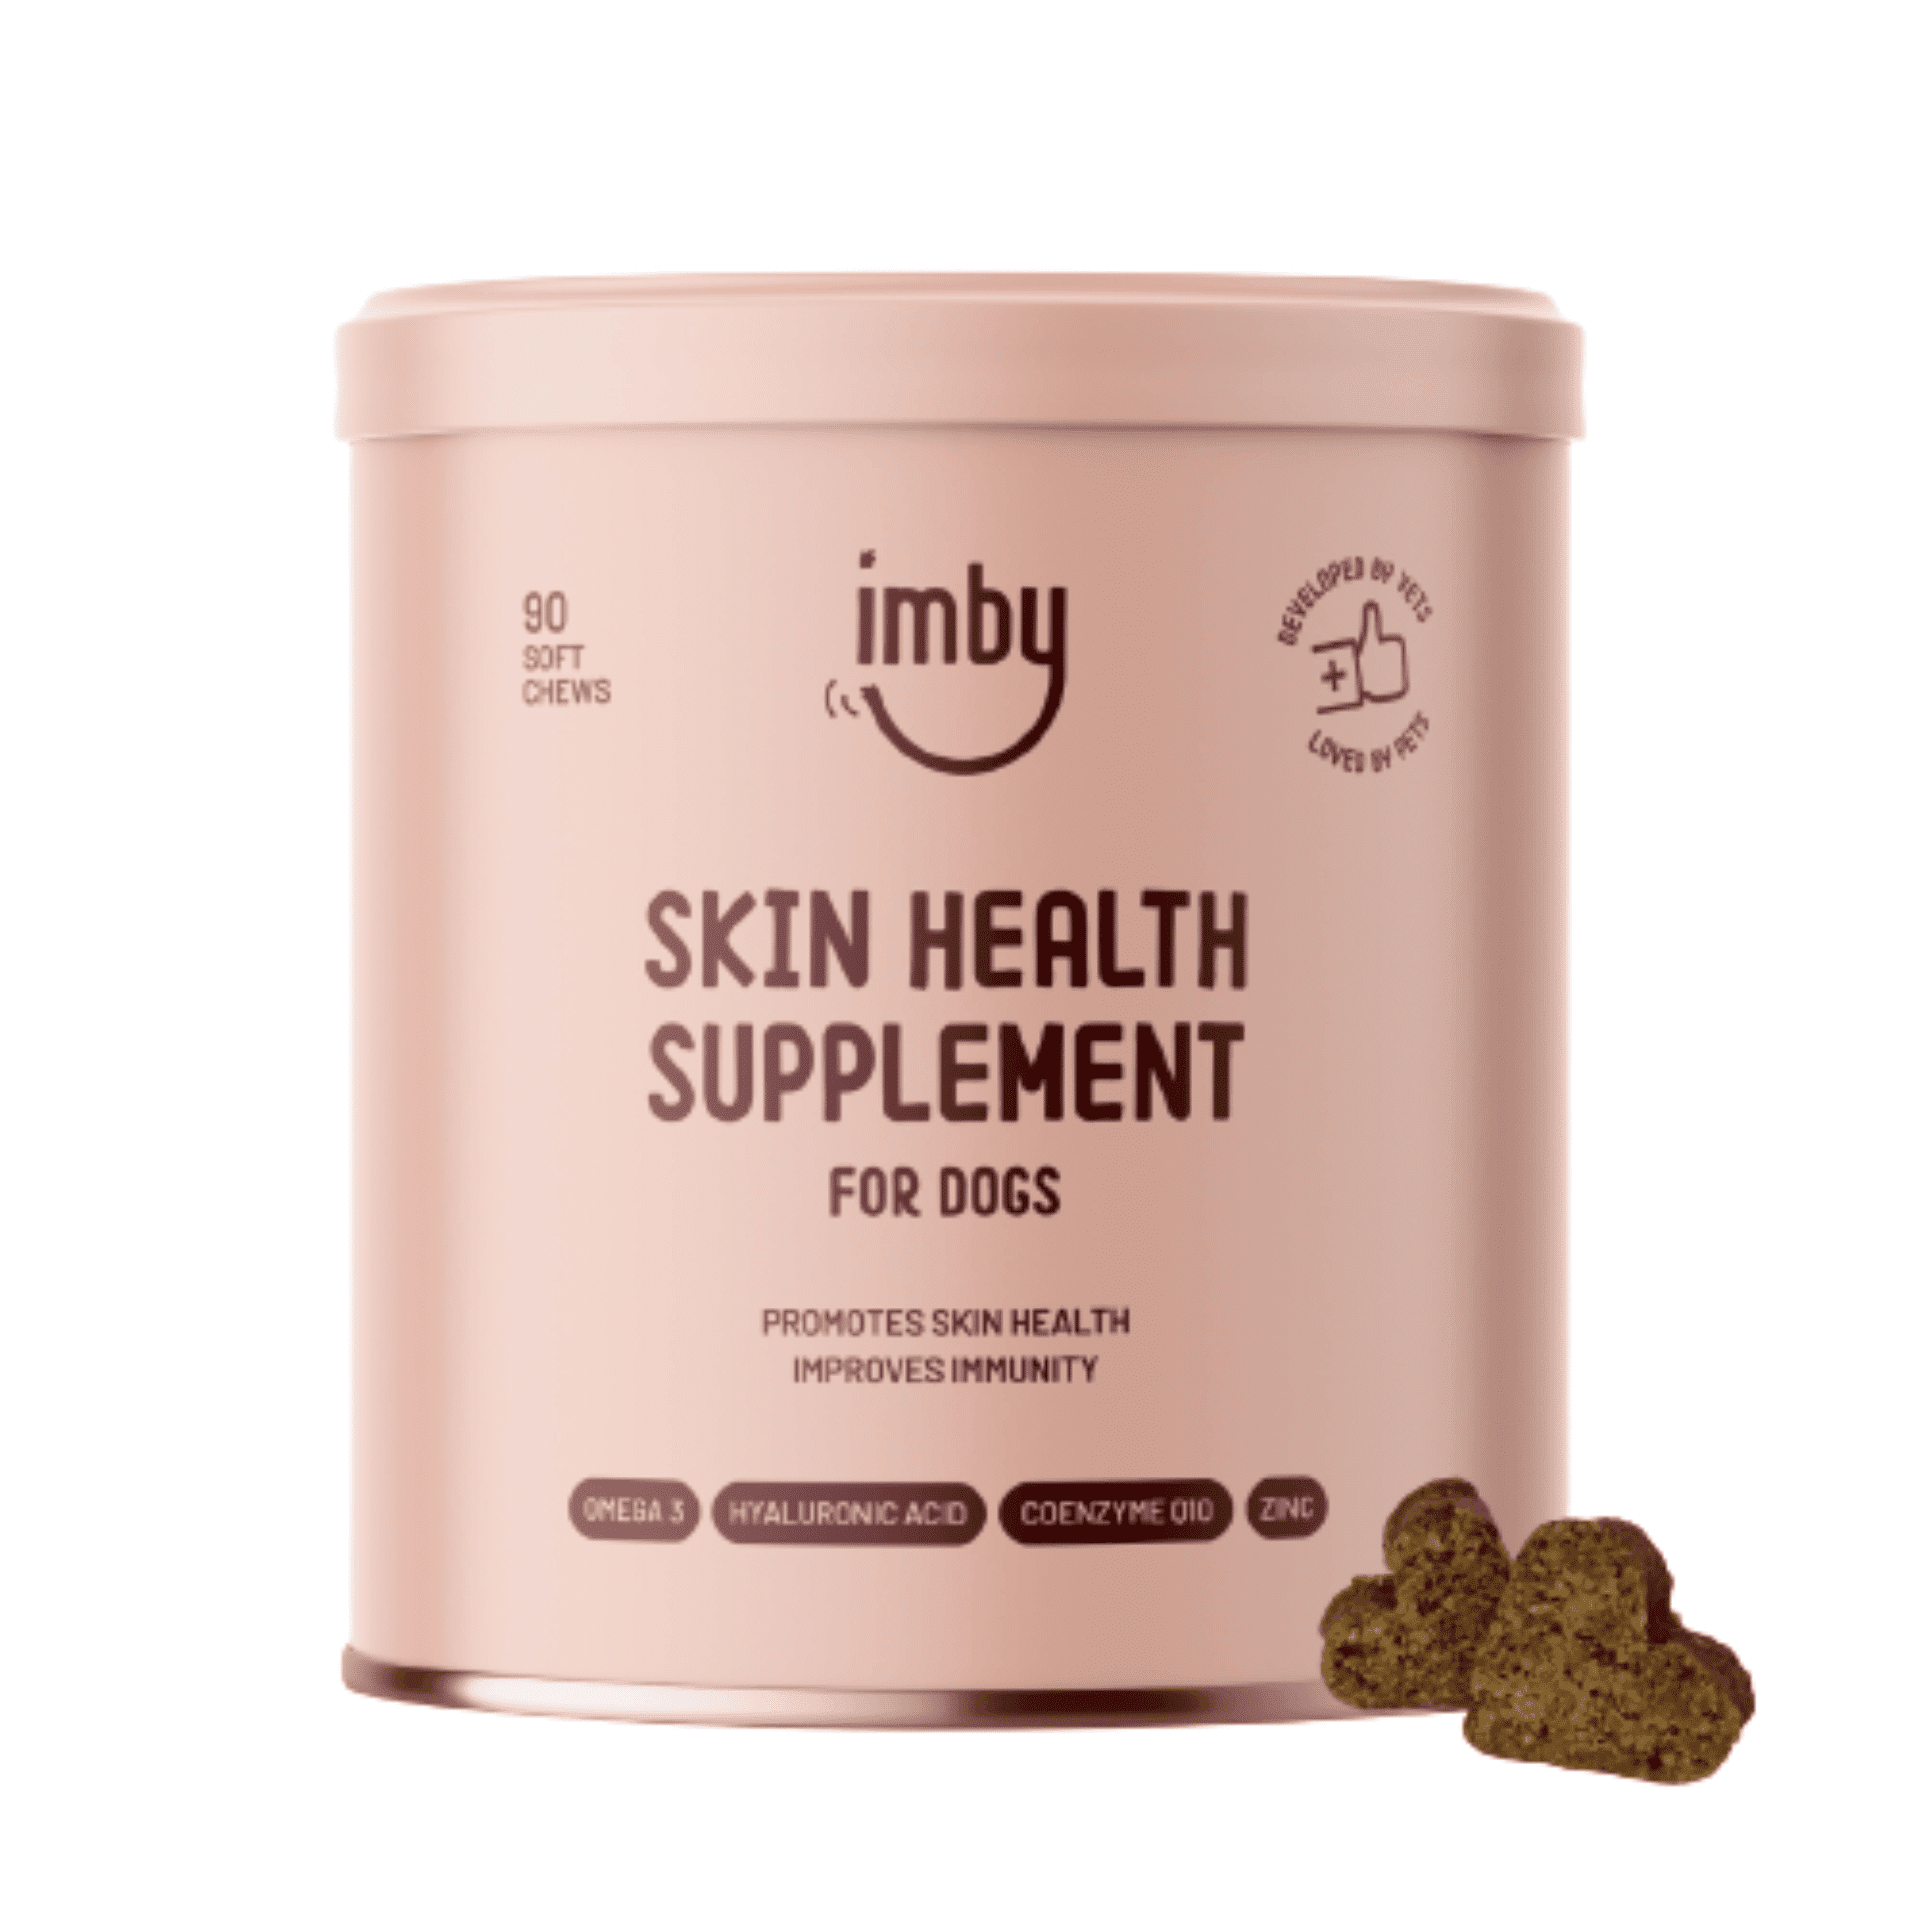 Imby Skin Health Supplement for Dogs